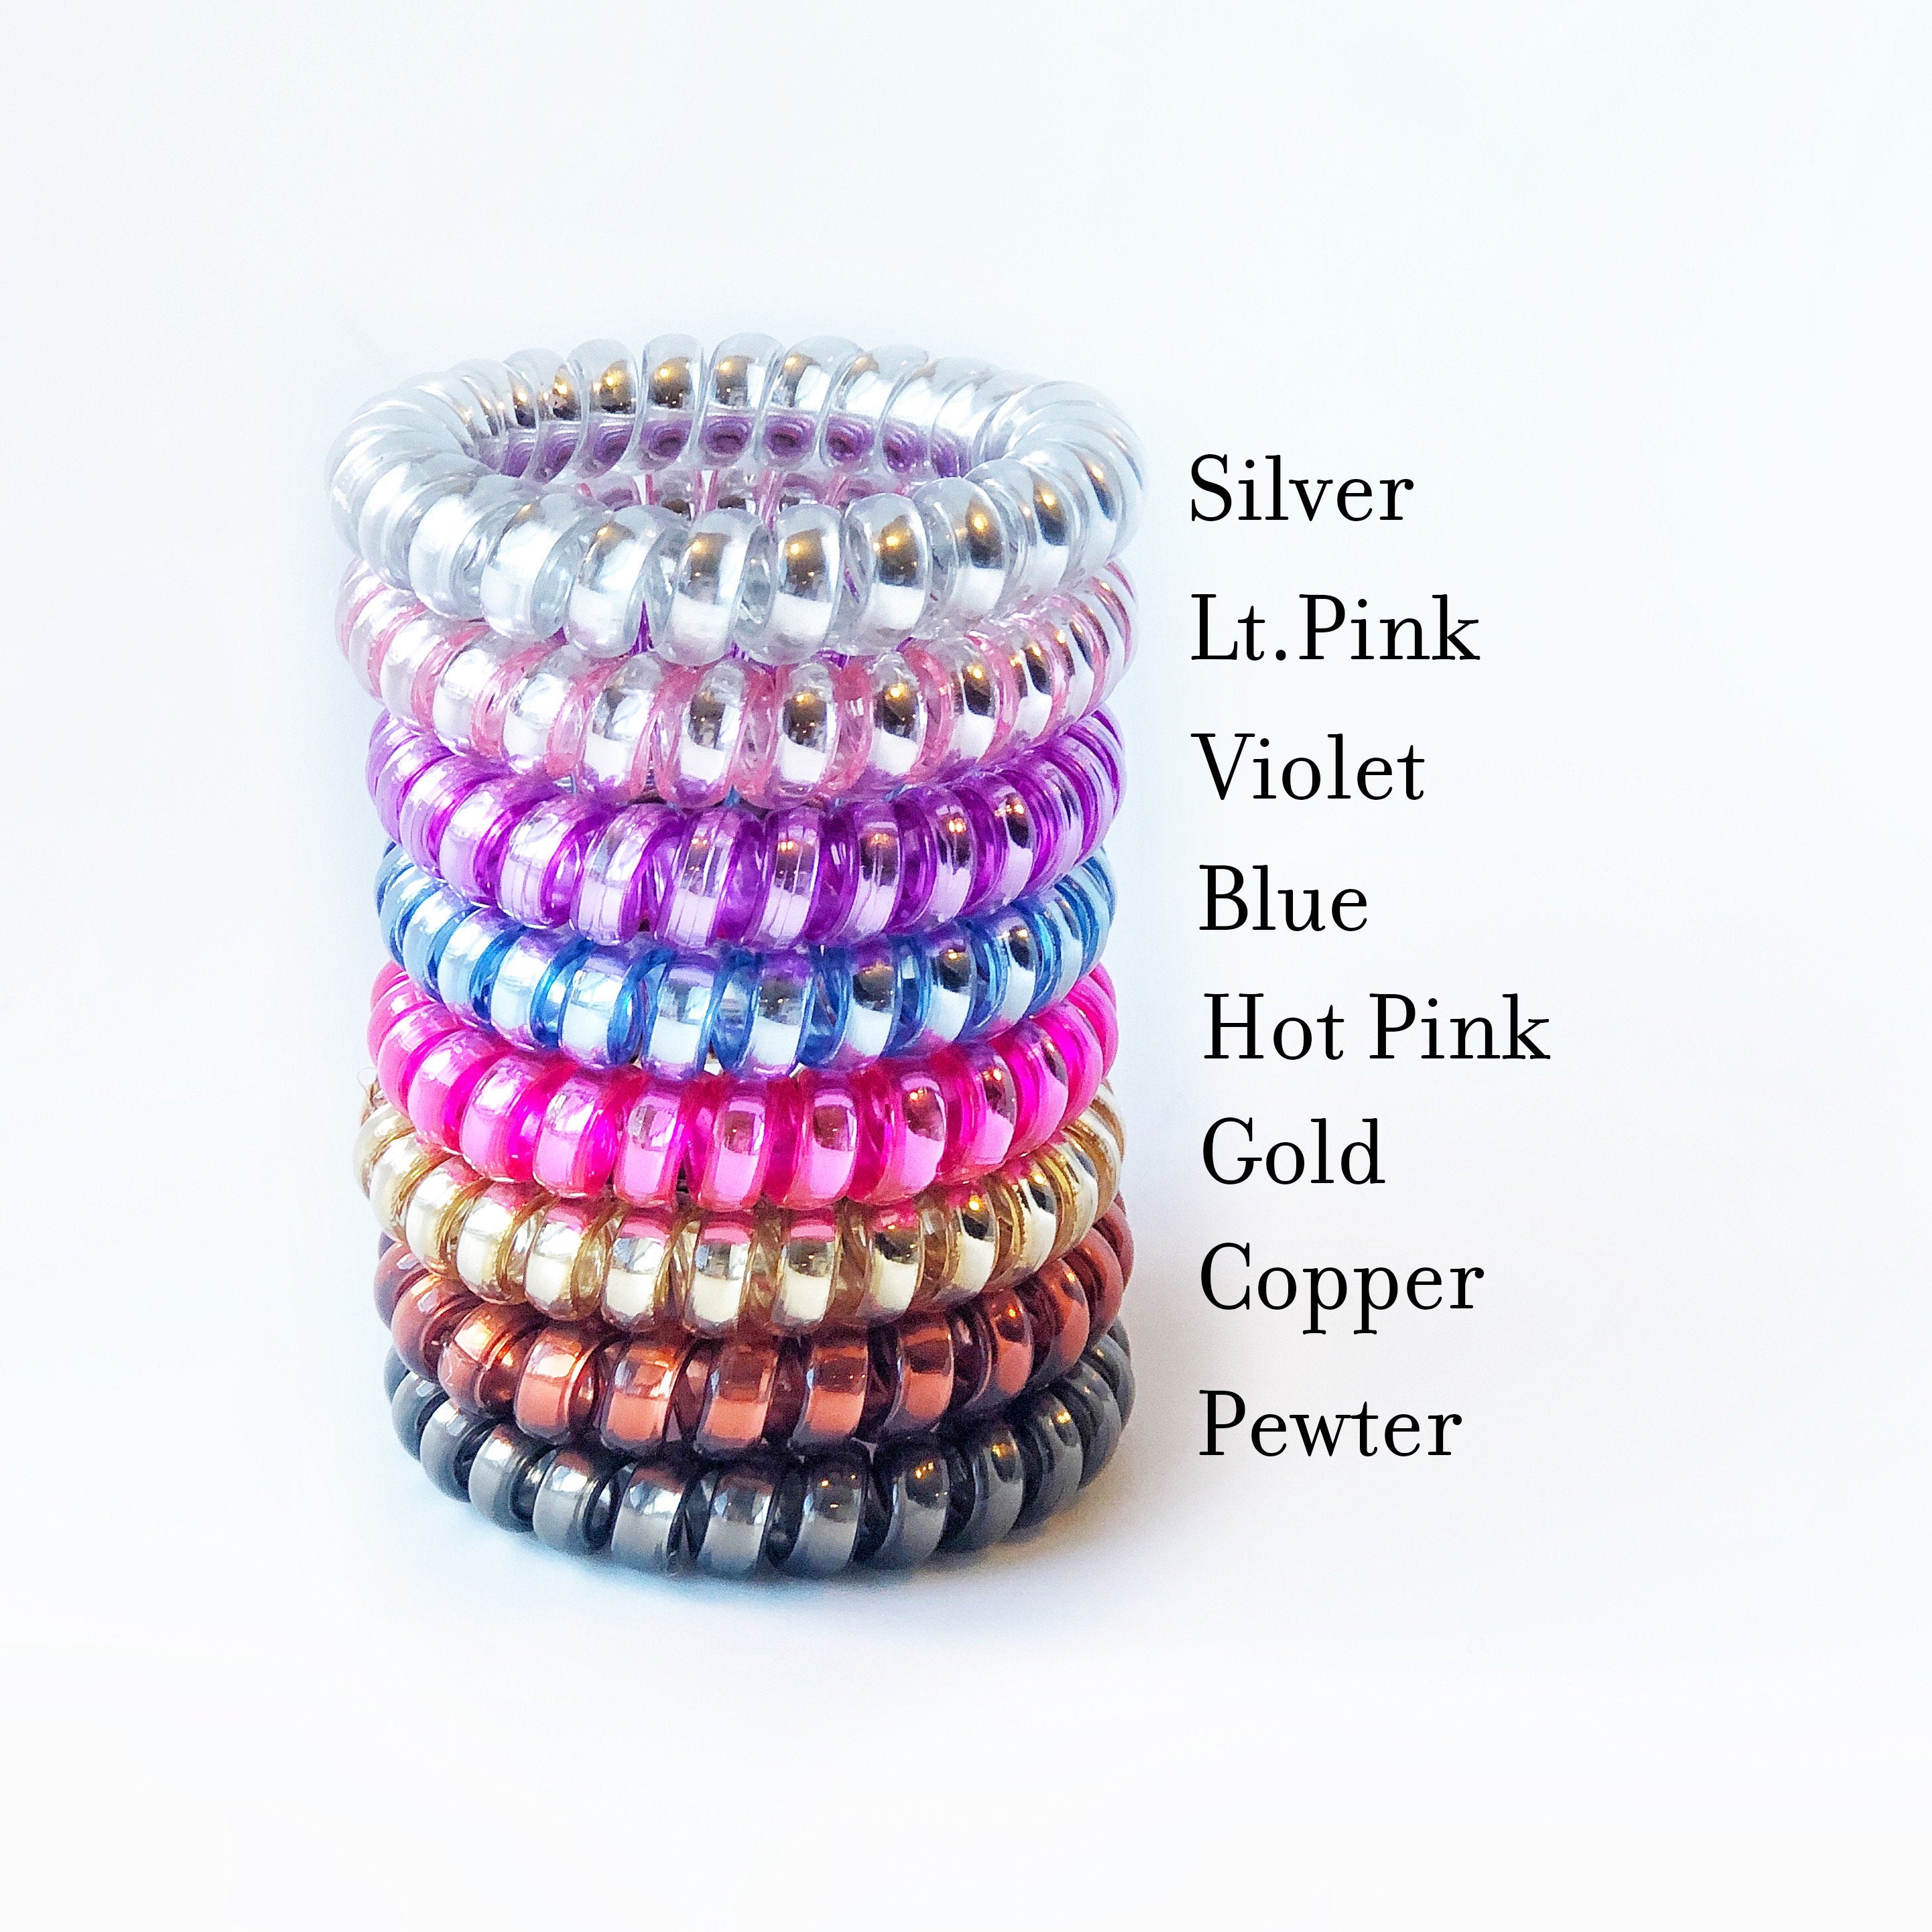 Dirty Thirty 30th Birthday Party Favors for Women, Spiral Hair Ties - @PlumPolkaDot 